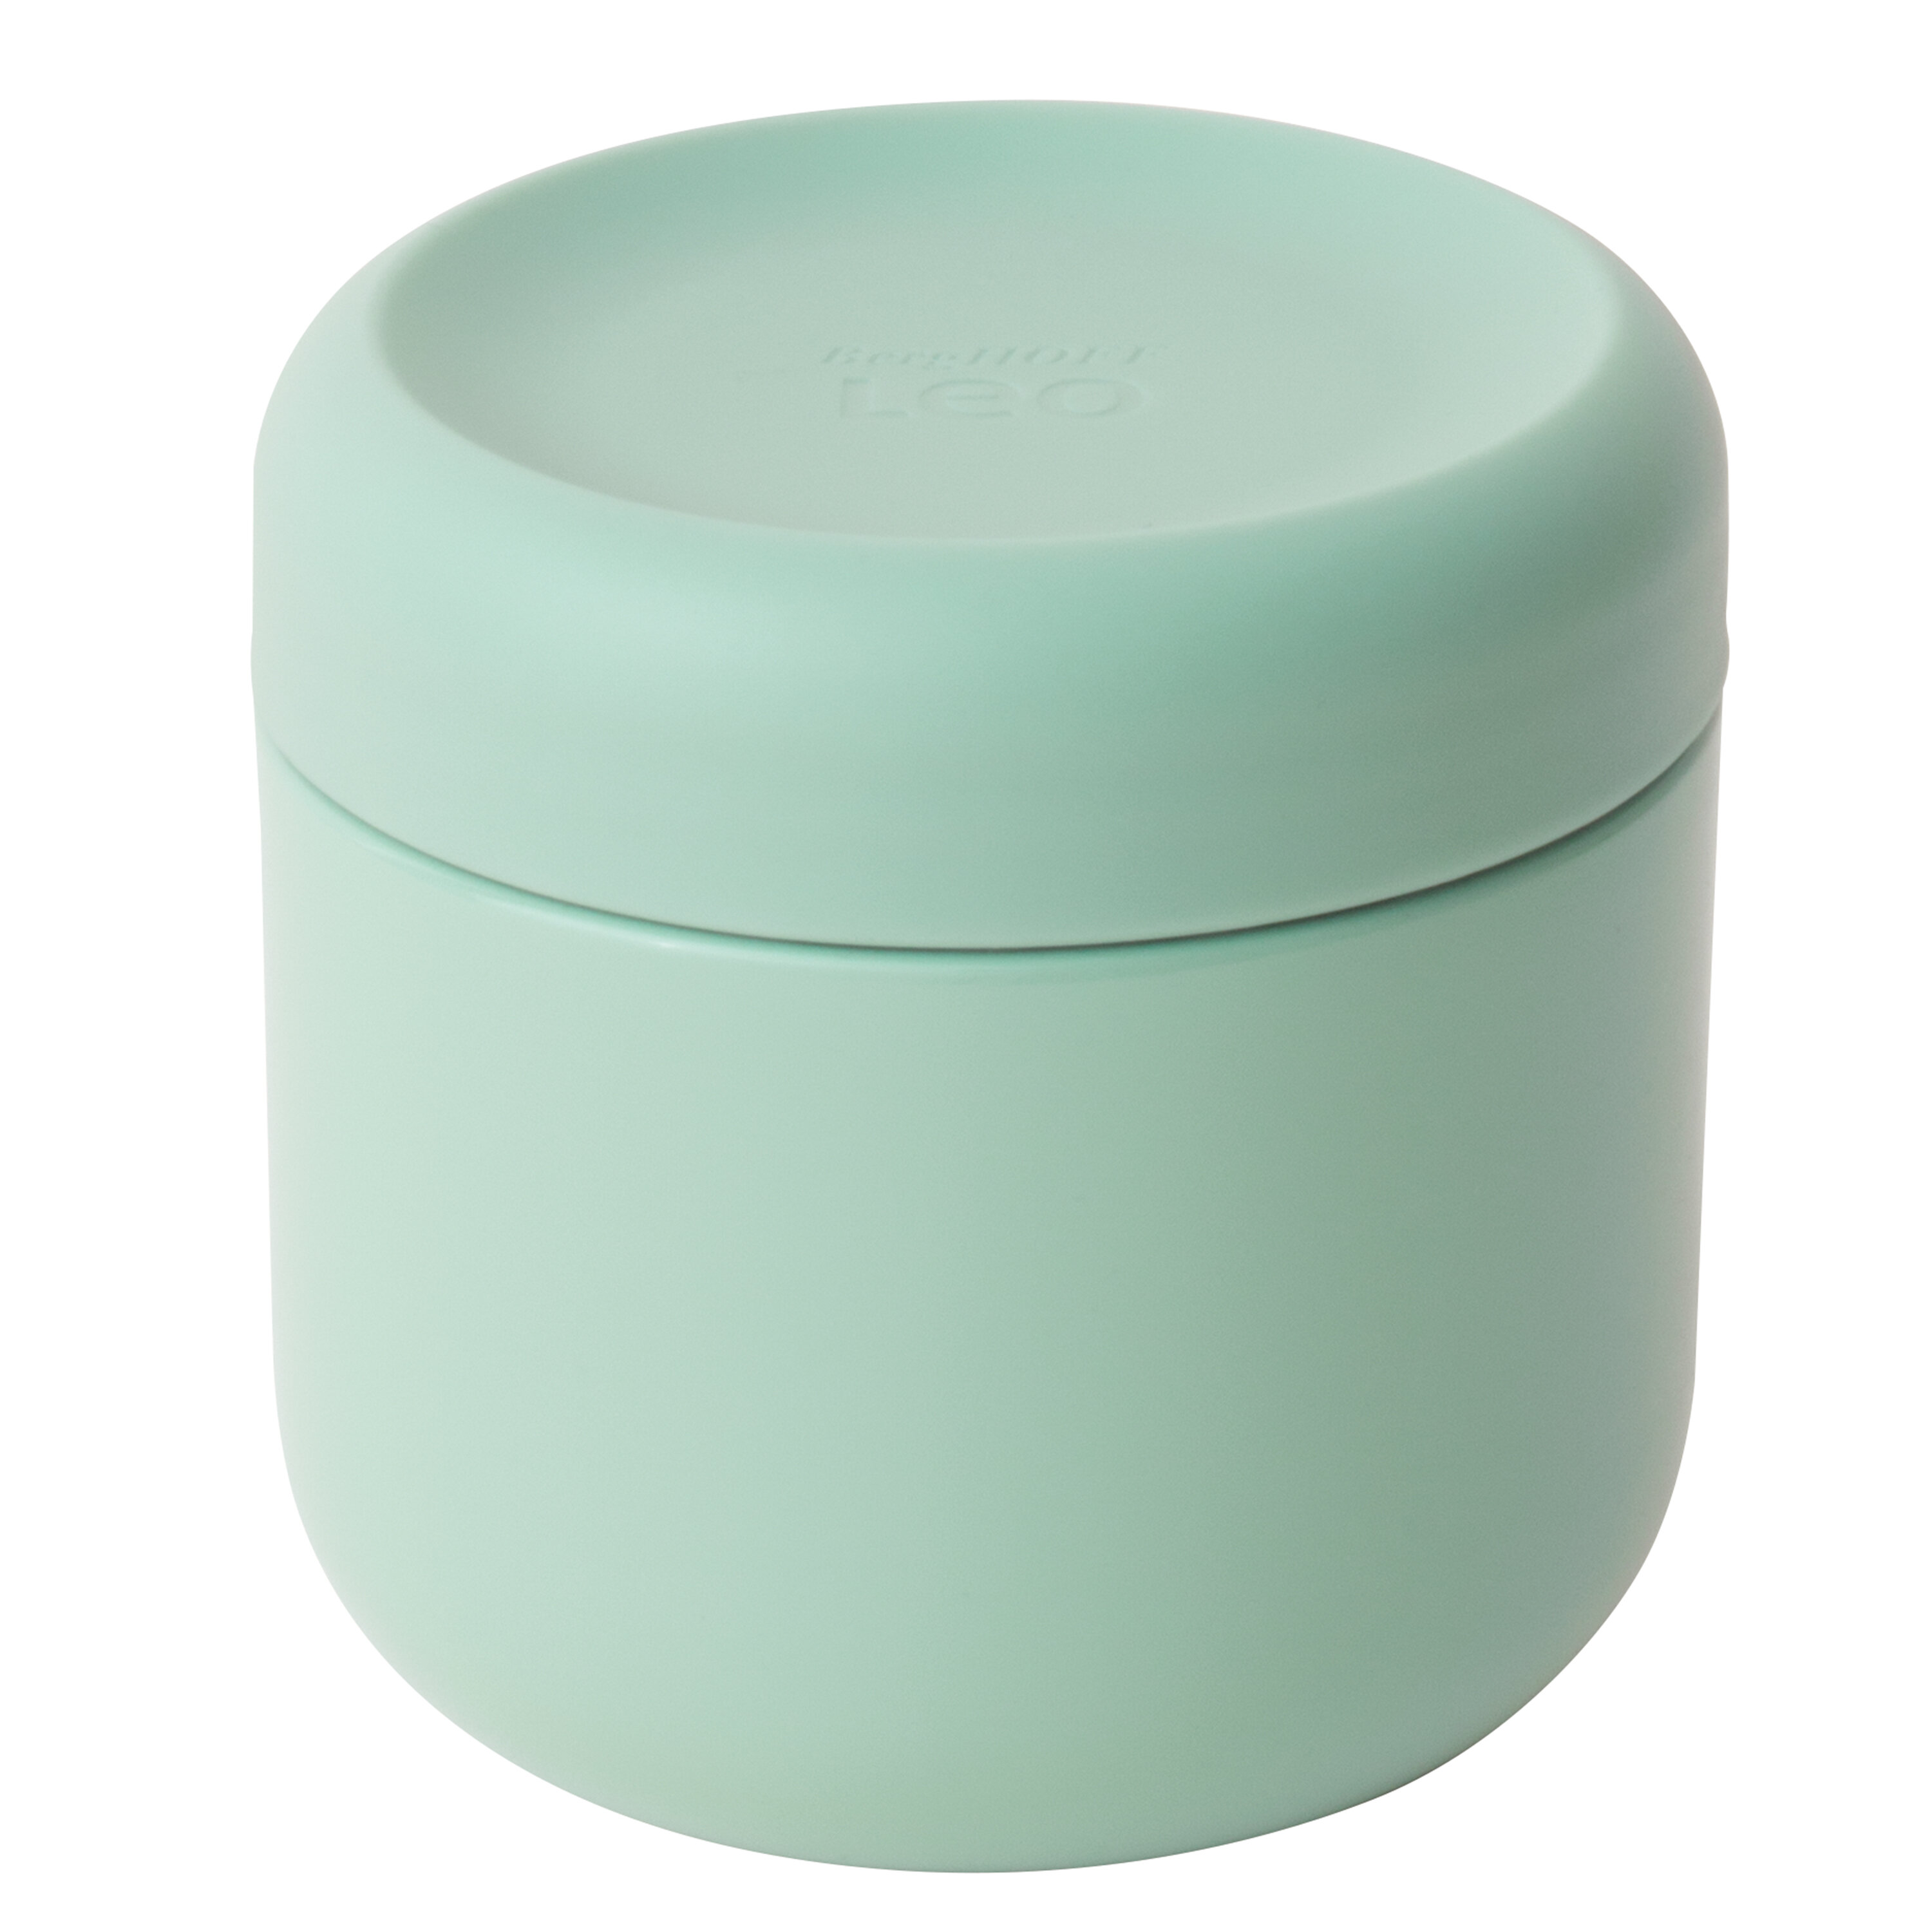 BergHOFF Leo Smart Seal Food Container - Green